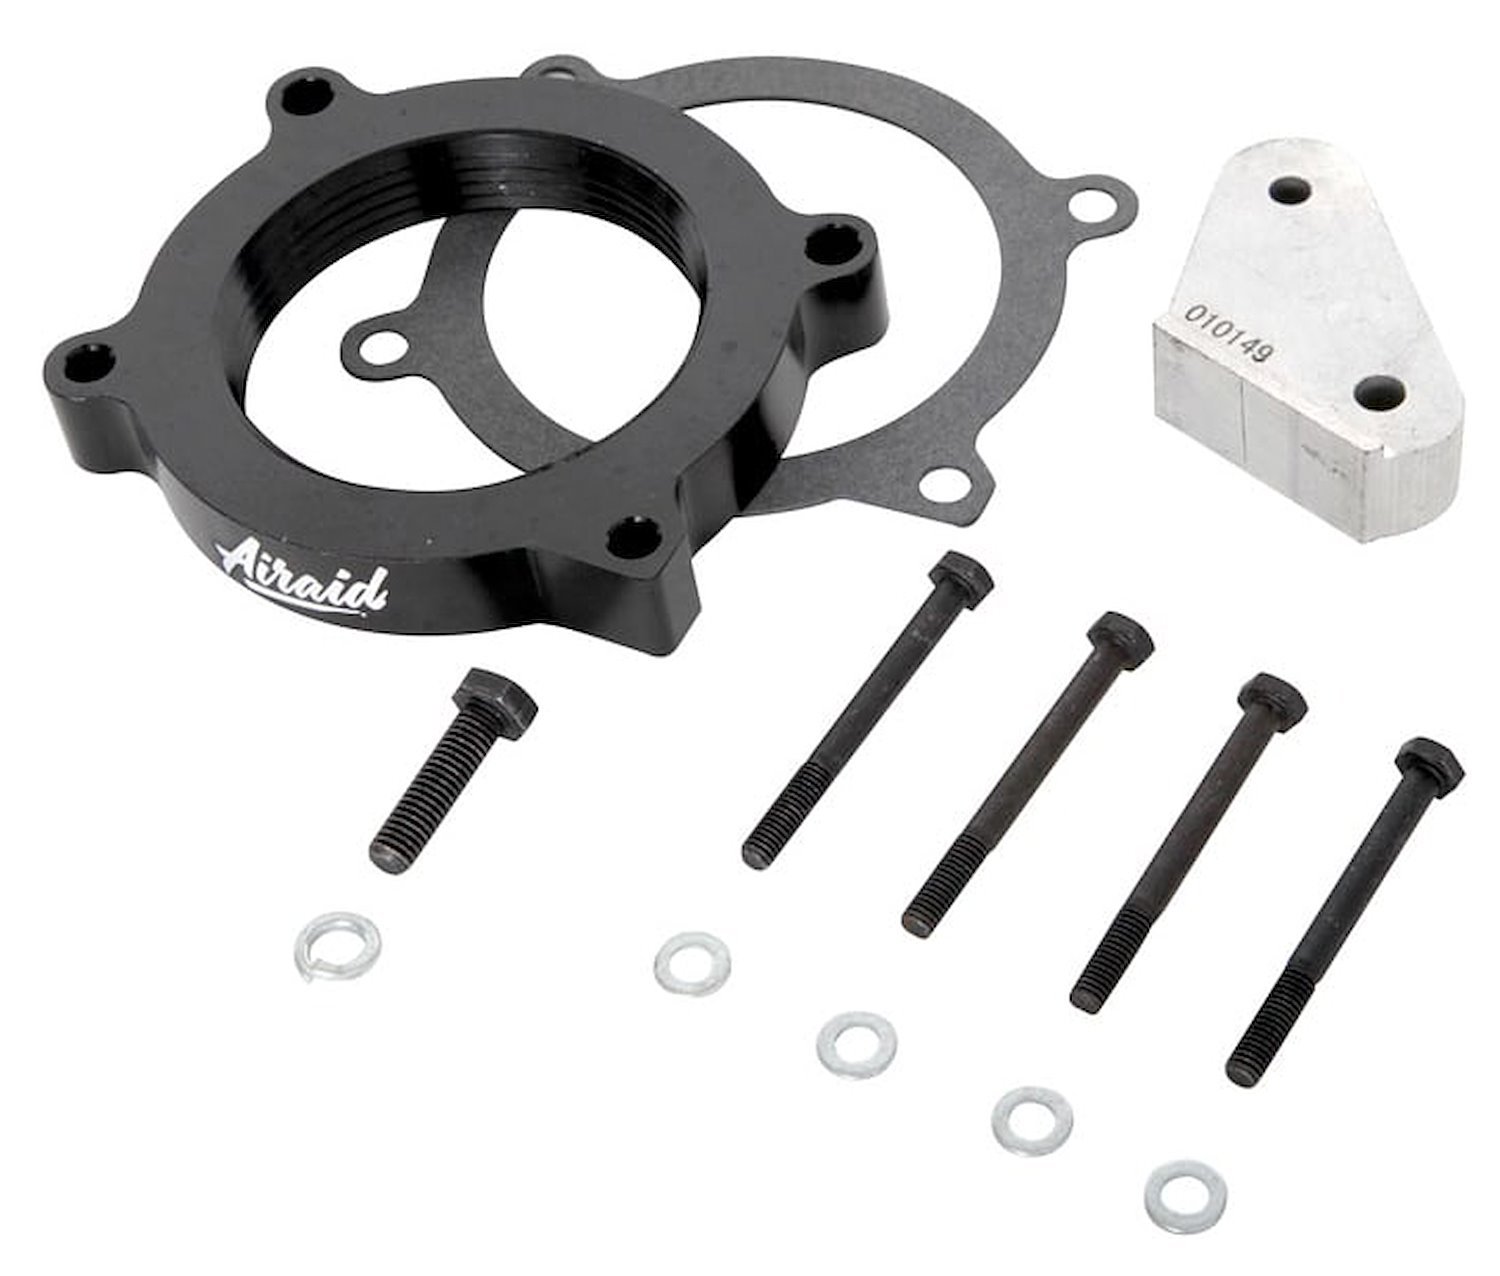 PowerAid Throttle Spacer fits Select GM Pickup Truck/SUV 6.2L Models [Black]